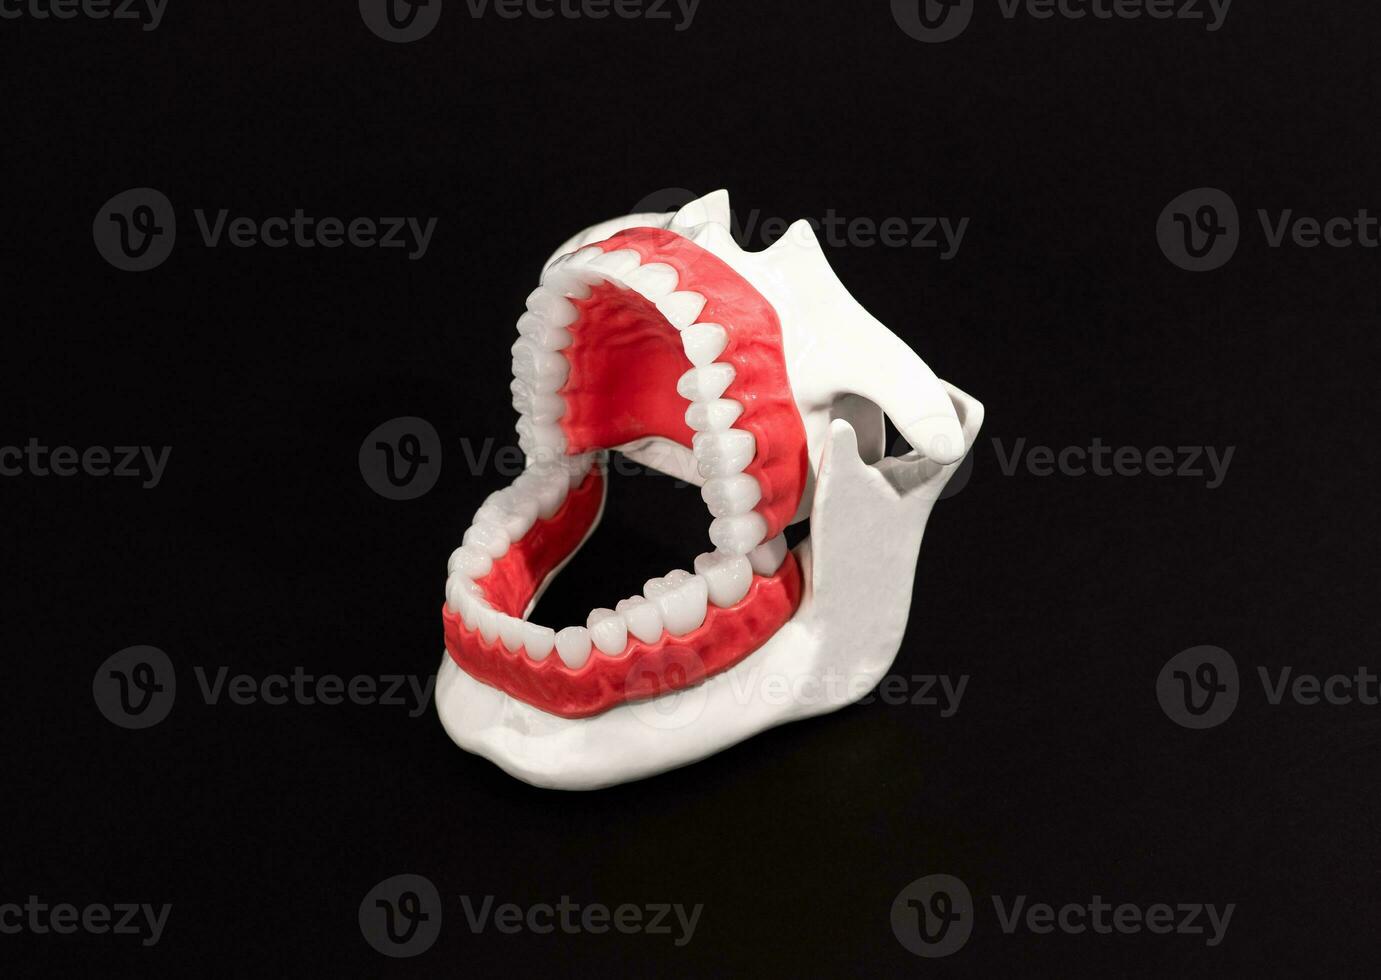 Human jaw with teeth and gums anatomy model isolated on black background. Opened jaw position. Healthy teeth, dental care, and orthodontic medical healthcare concept. photo